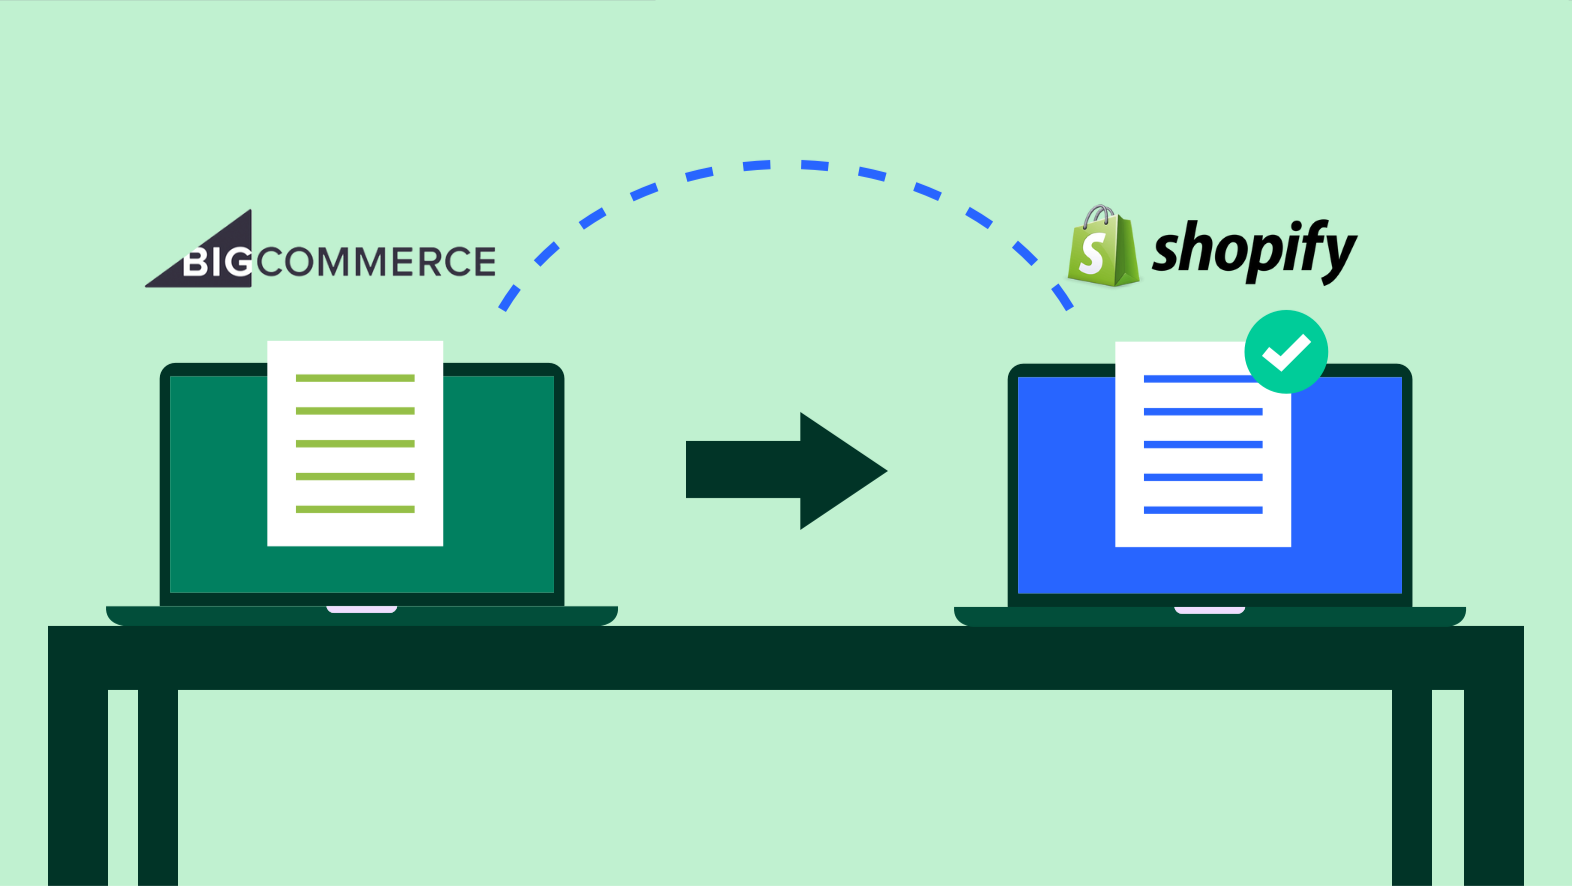 switching from bigcommerce to shopify